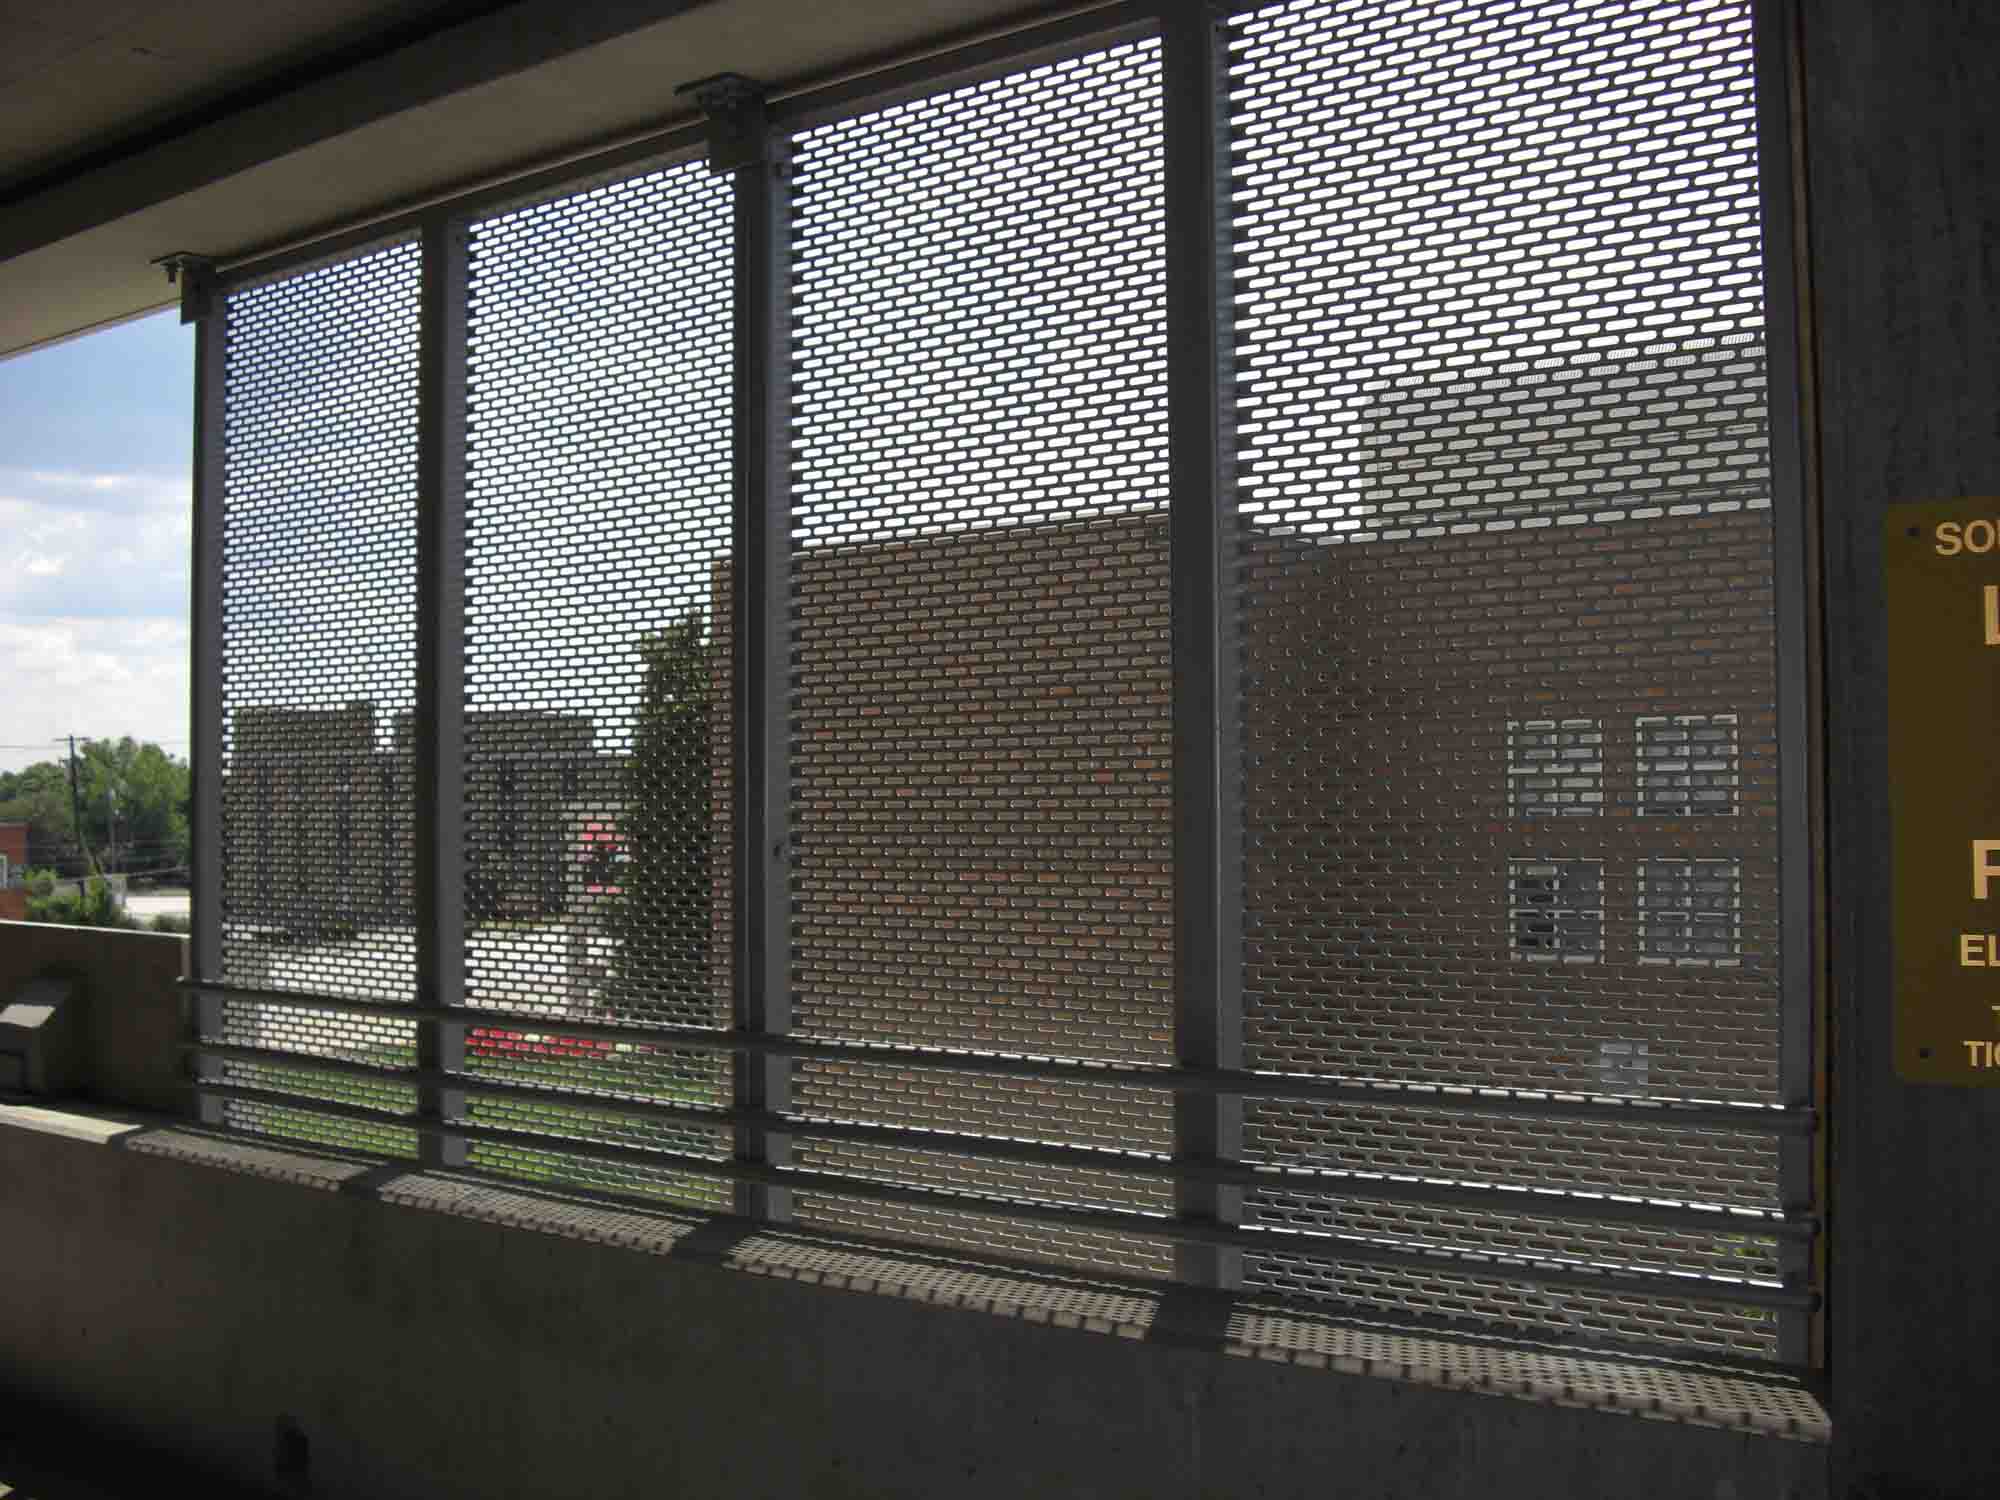 Slotted Perforated Metal infill panels used for security inside the parking garage.